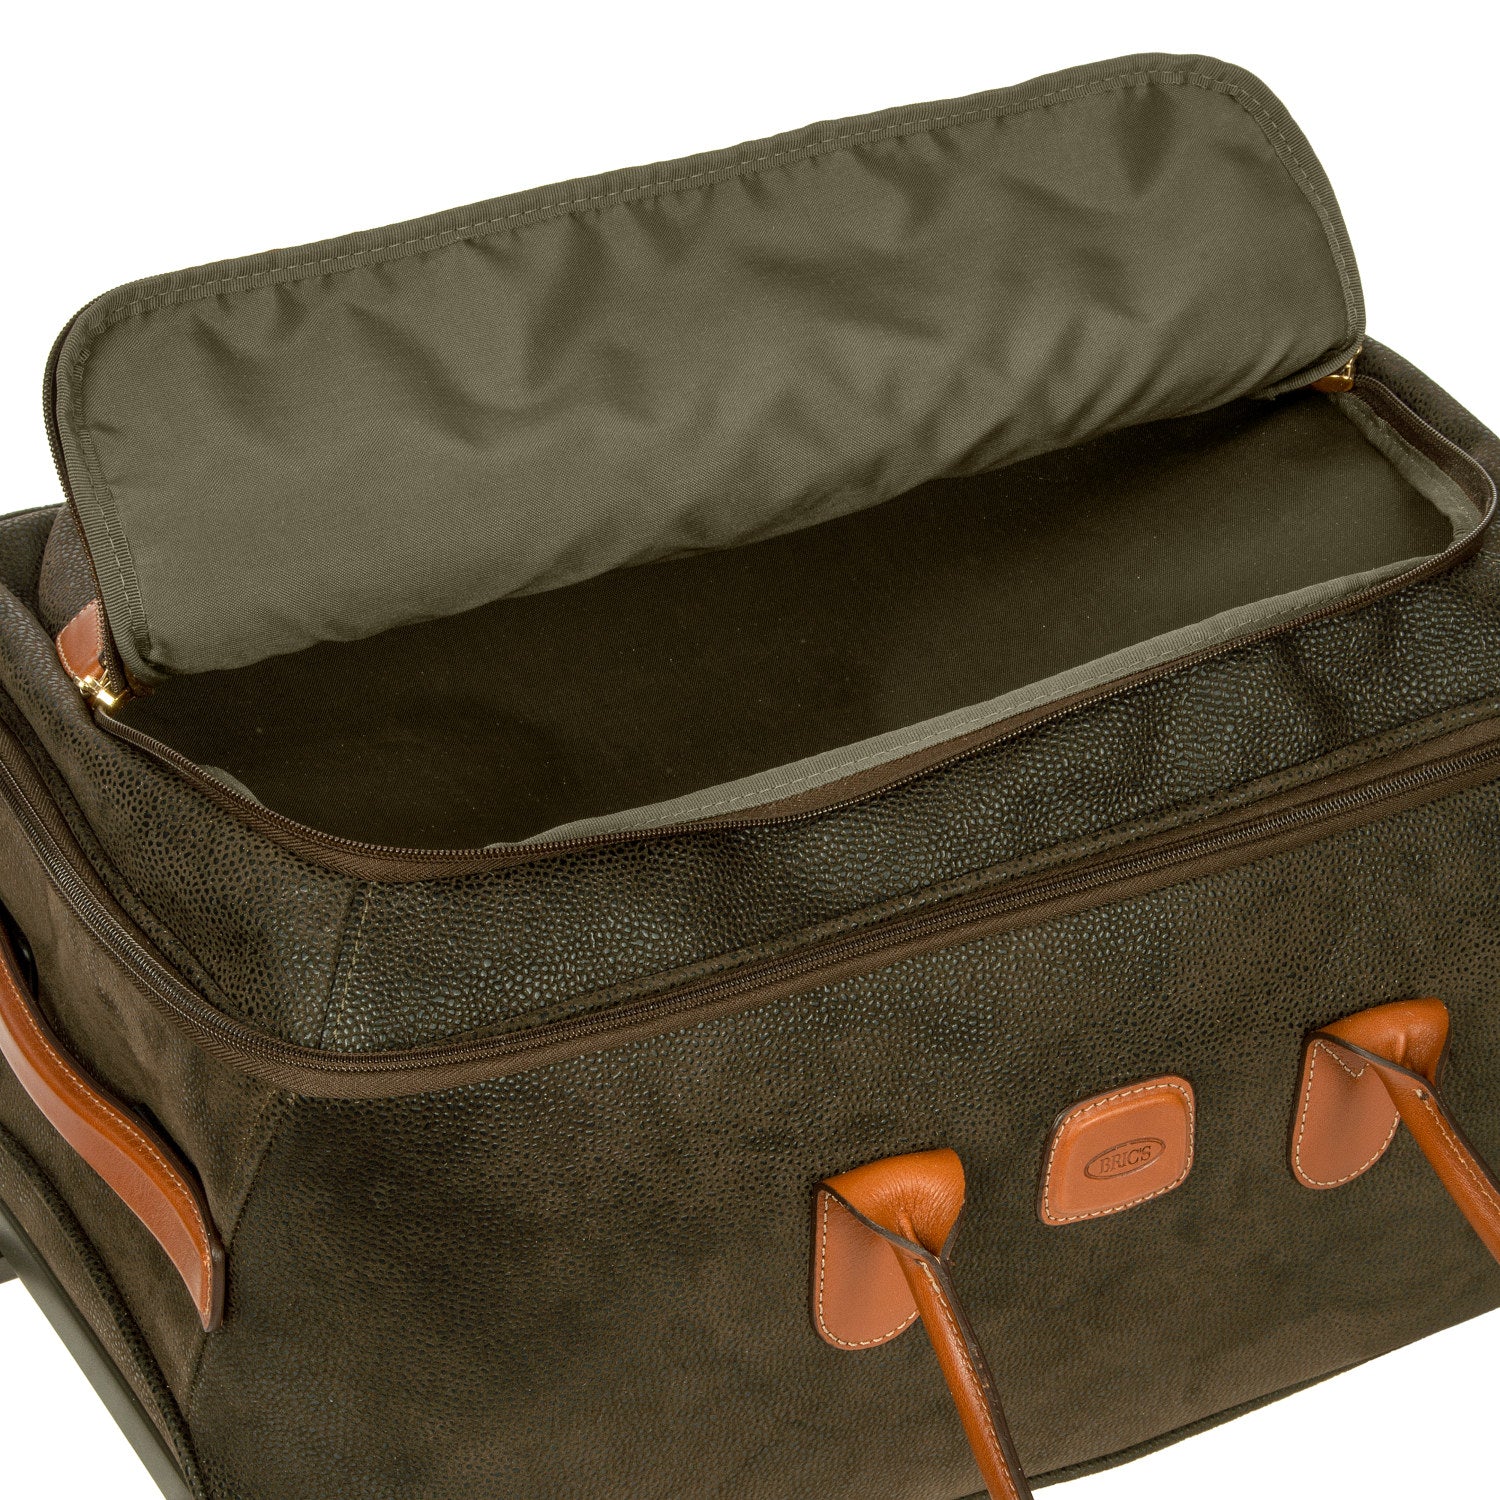 BRIC'S LIFE 21" CARRY-ON ROLLING DUFFLE BAG - OLIVE OR BLACK